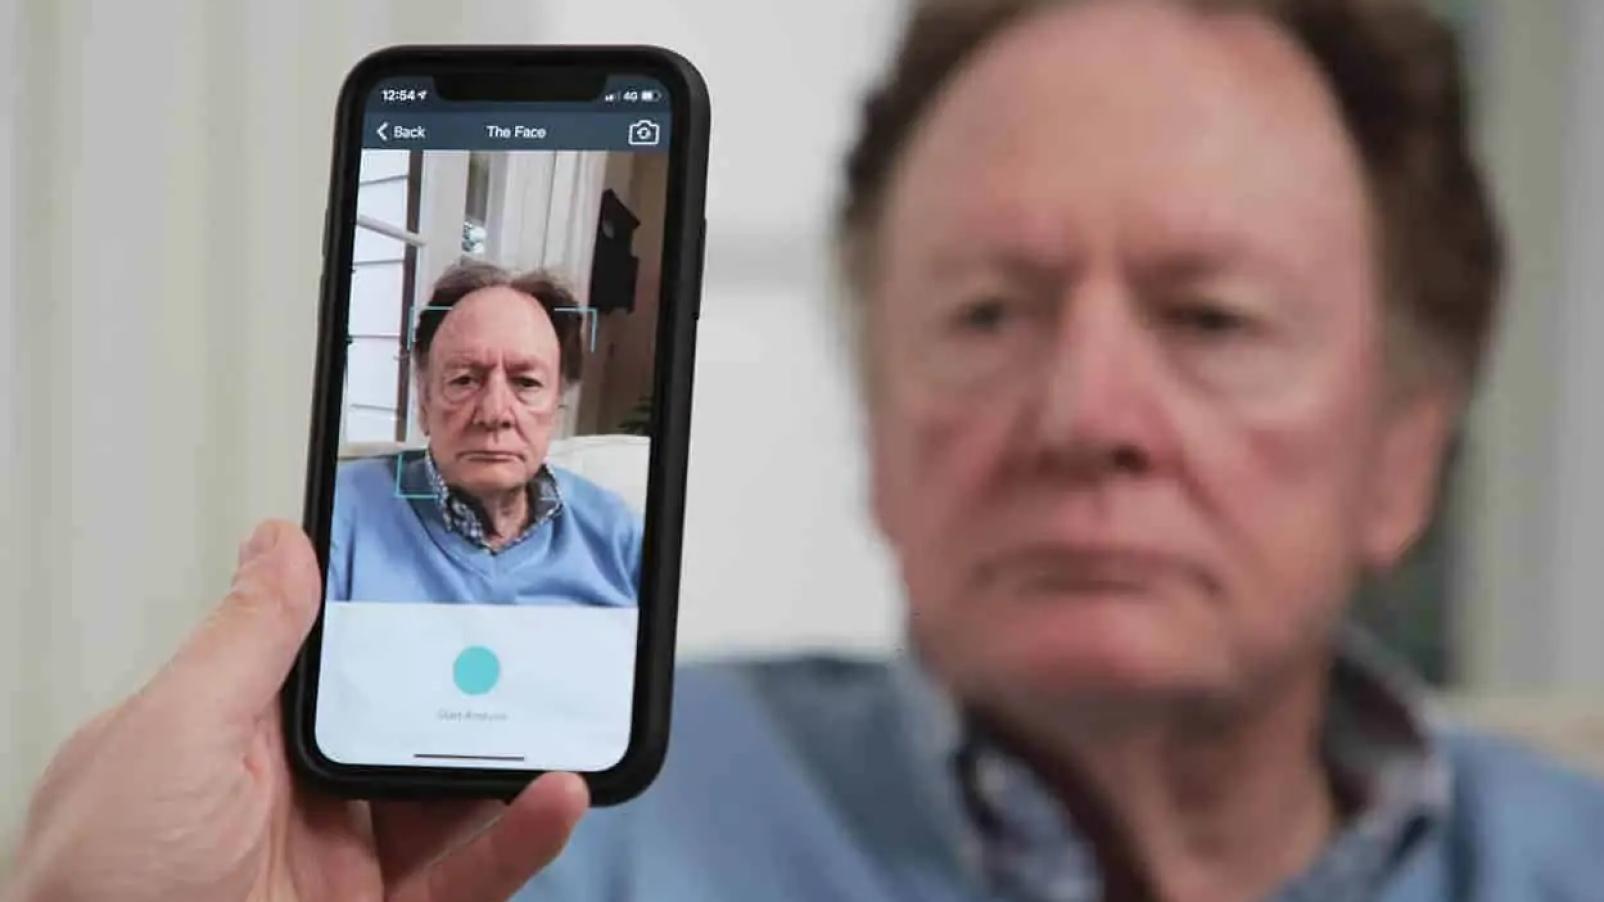 The PainChek app on a phone analyses the face of an older man